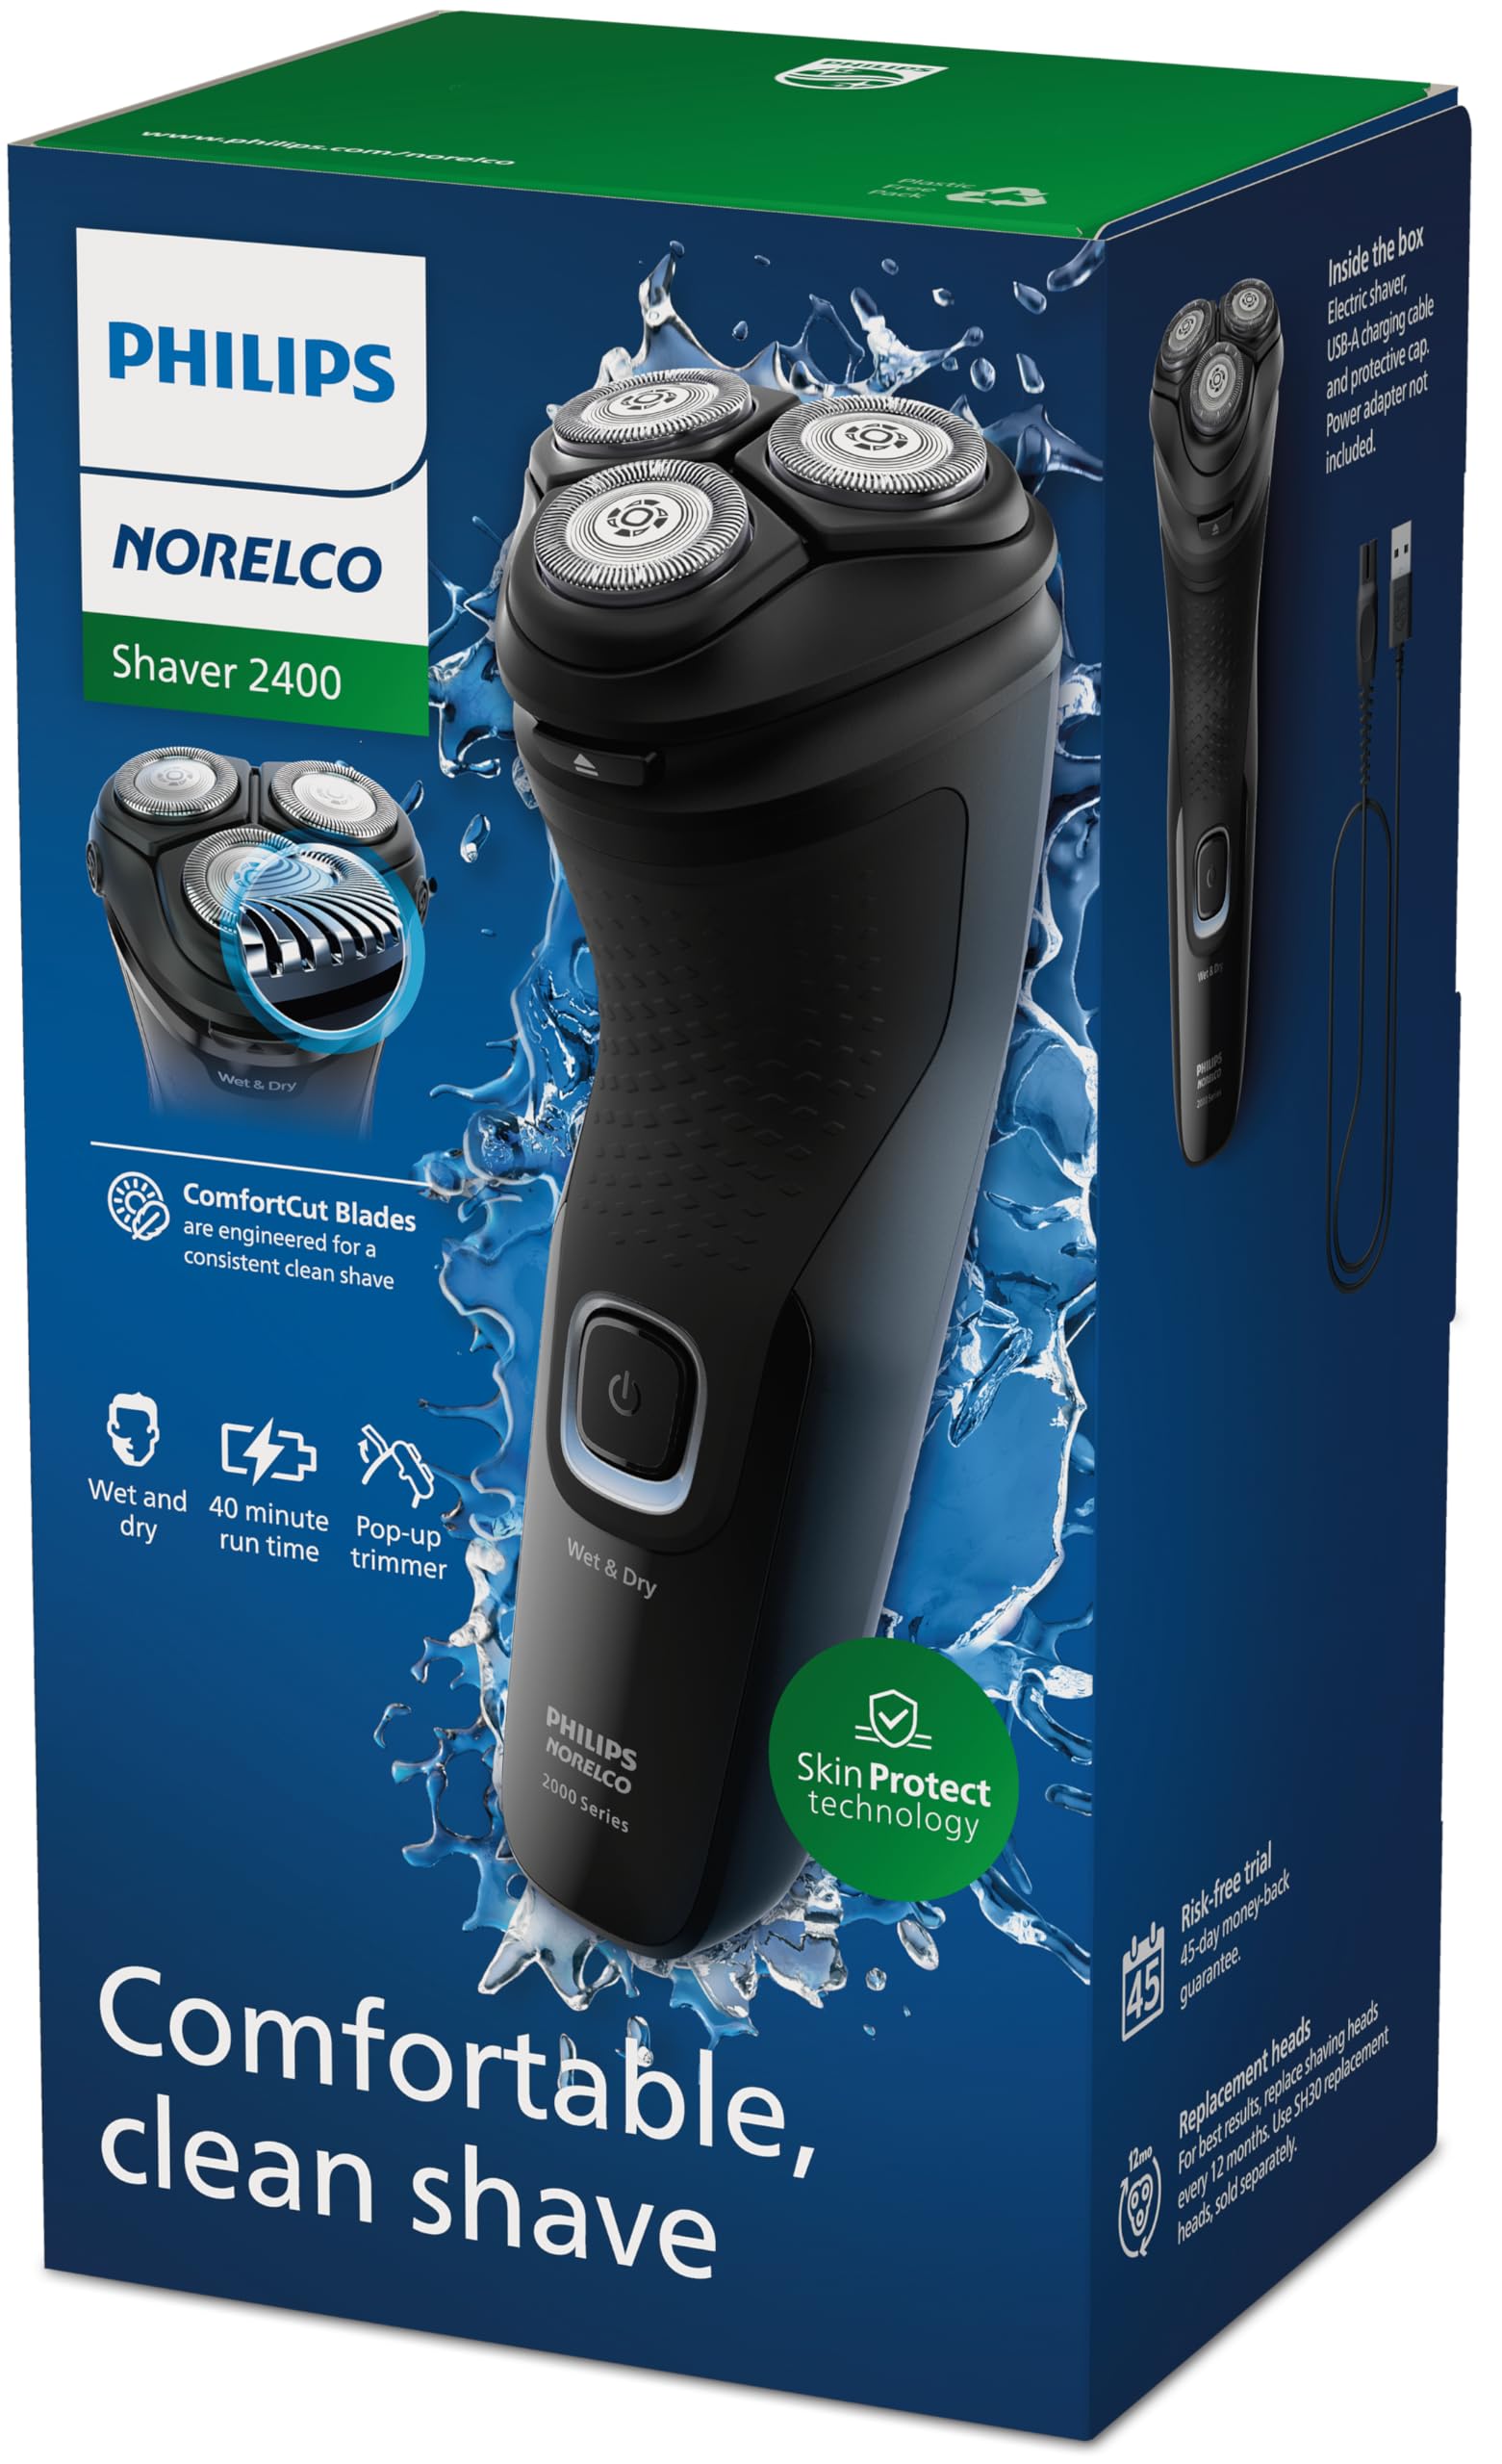 Philips Norelco Shaver 2400, Cordless Electric Shaver with Pop-Up Trimmer, X3001/90